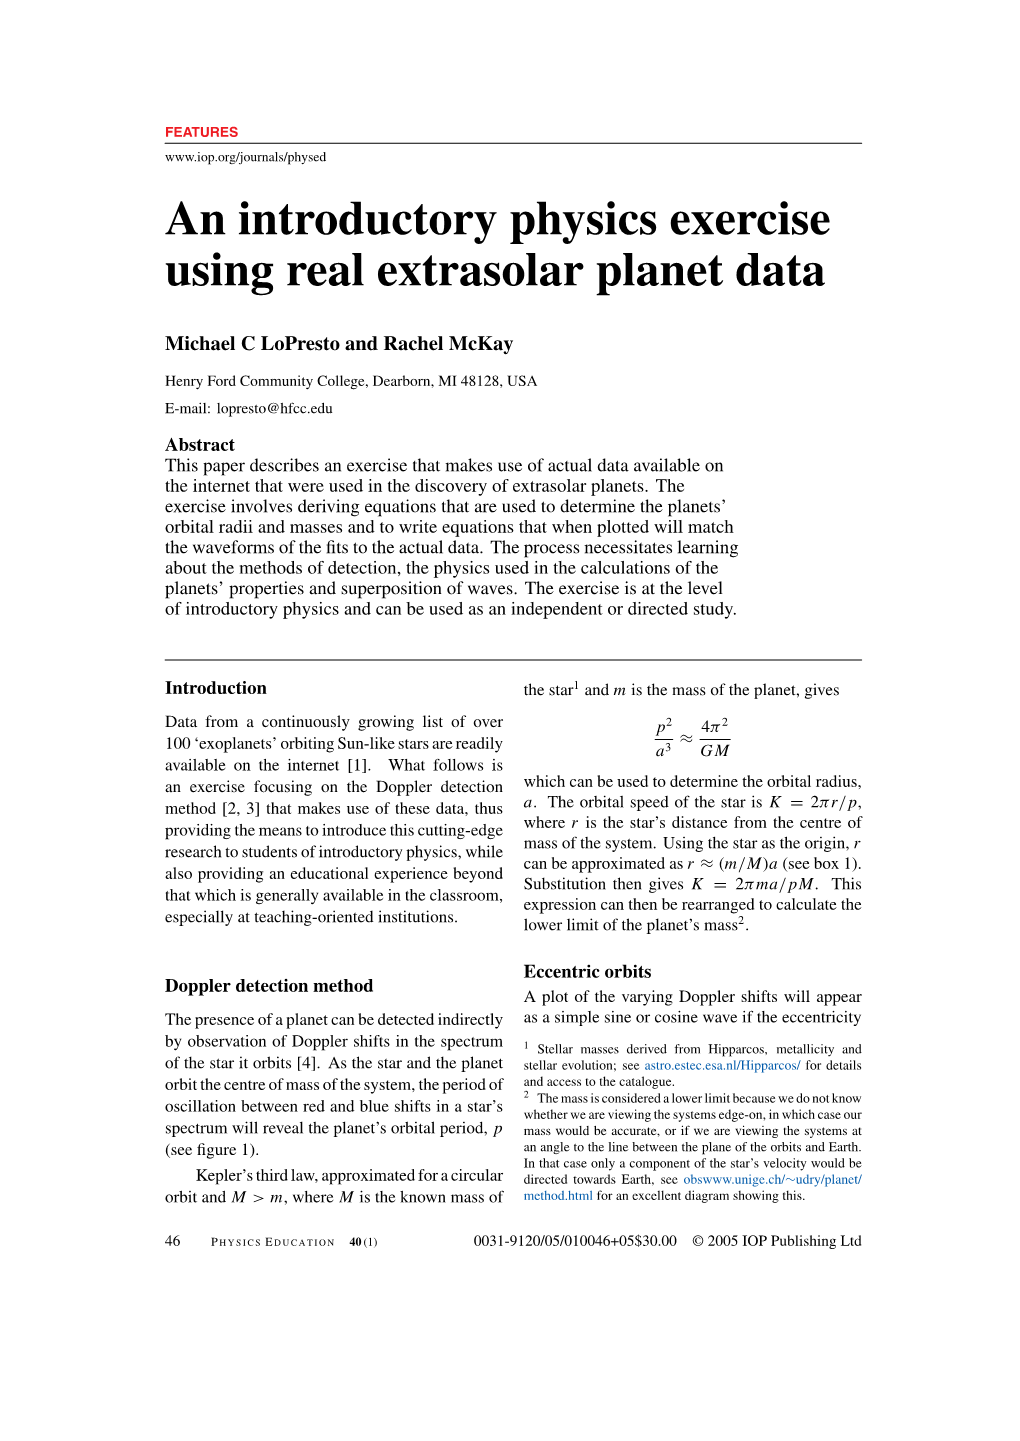 An Introductory Physics Exercise Using Real Extrasolar Planet Data